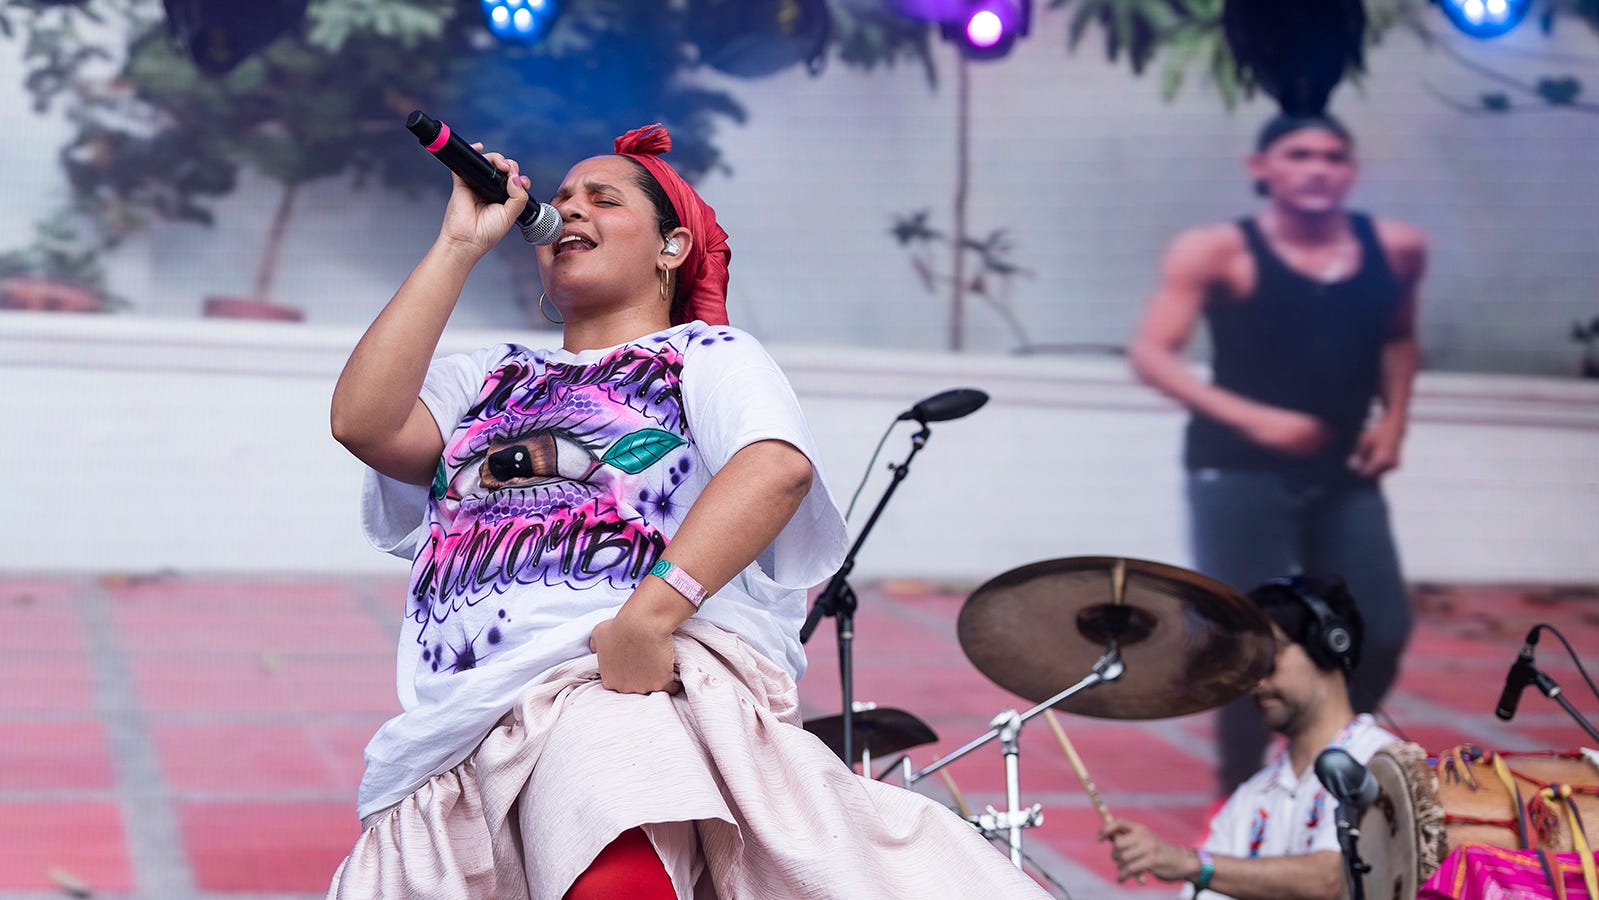 Lido Pimienta at ACL Fest: Colombian-born, Canadian-based singer soars